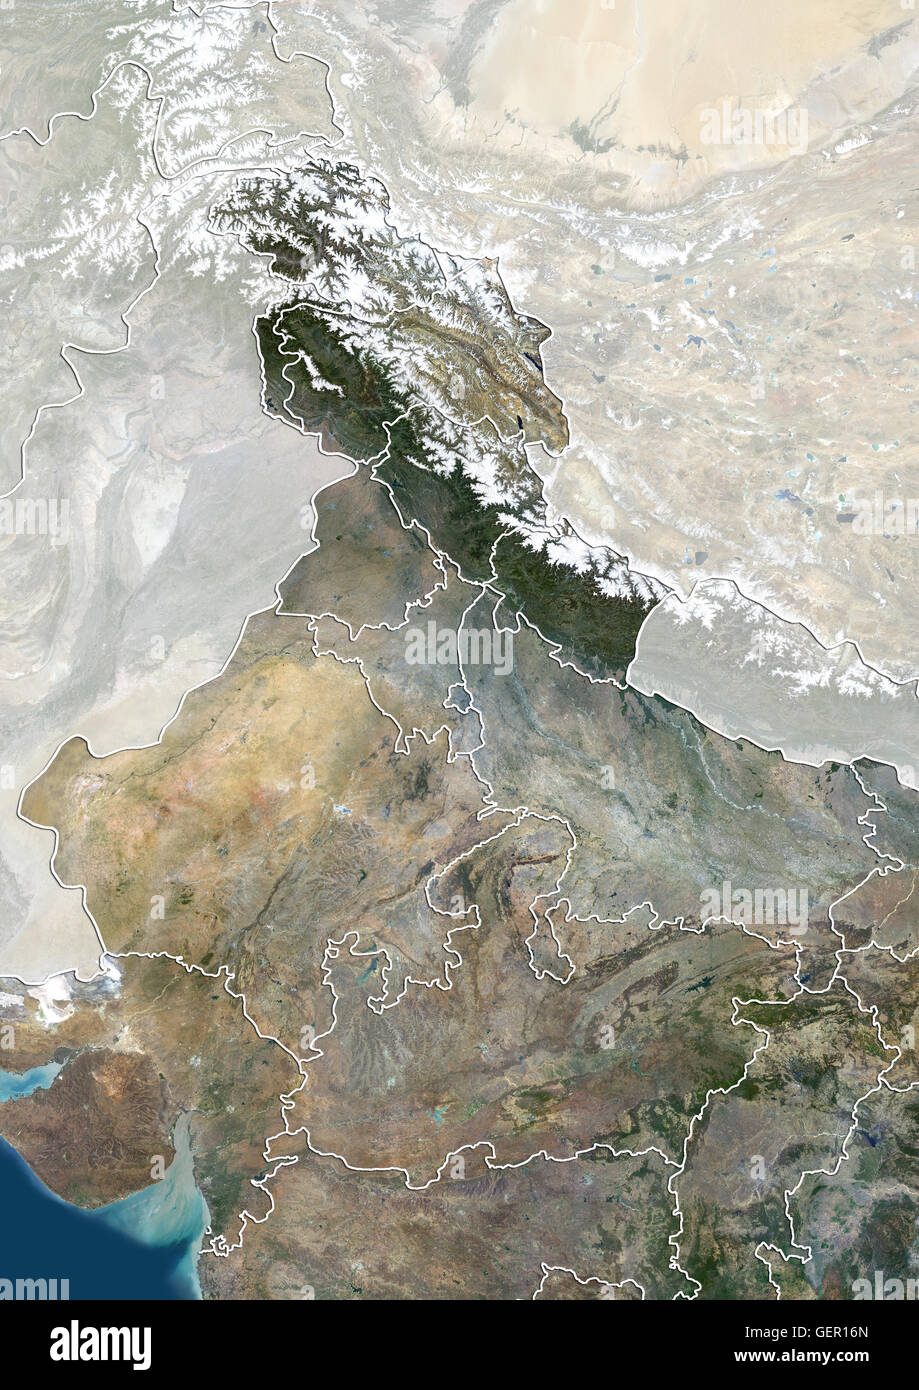 Satellite view of North India with administrative boundaries and mask, including boundaries of Jammu and Kashmir disputed areas. This image was compiled from data acquired by Landsat 8 satellite in 2014. Stock Photo